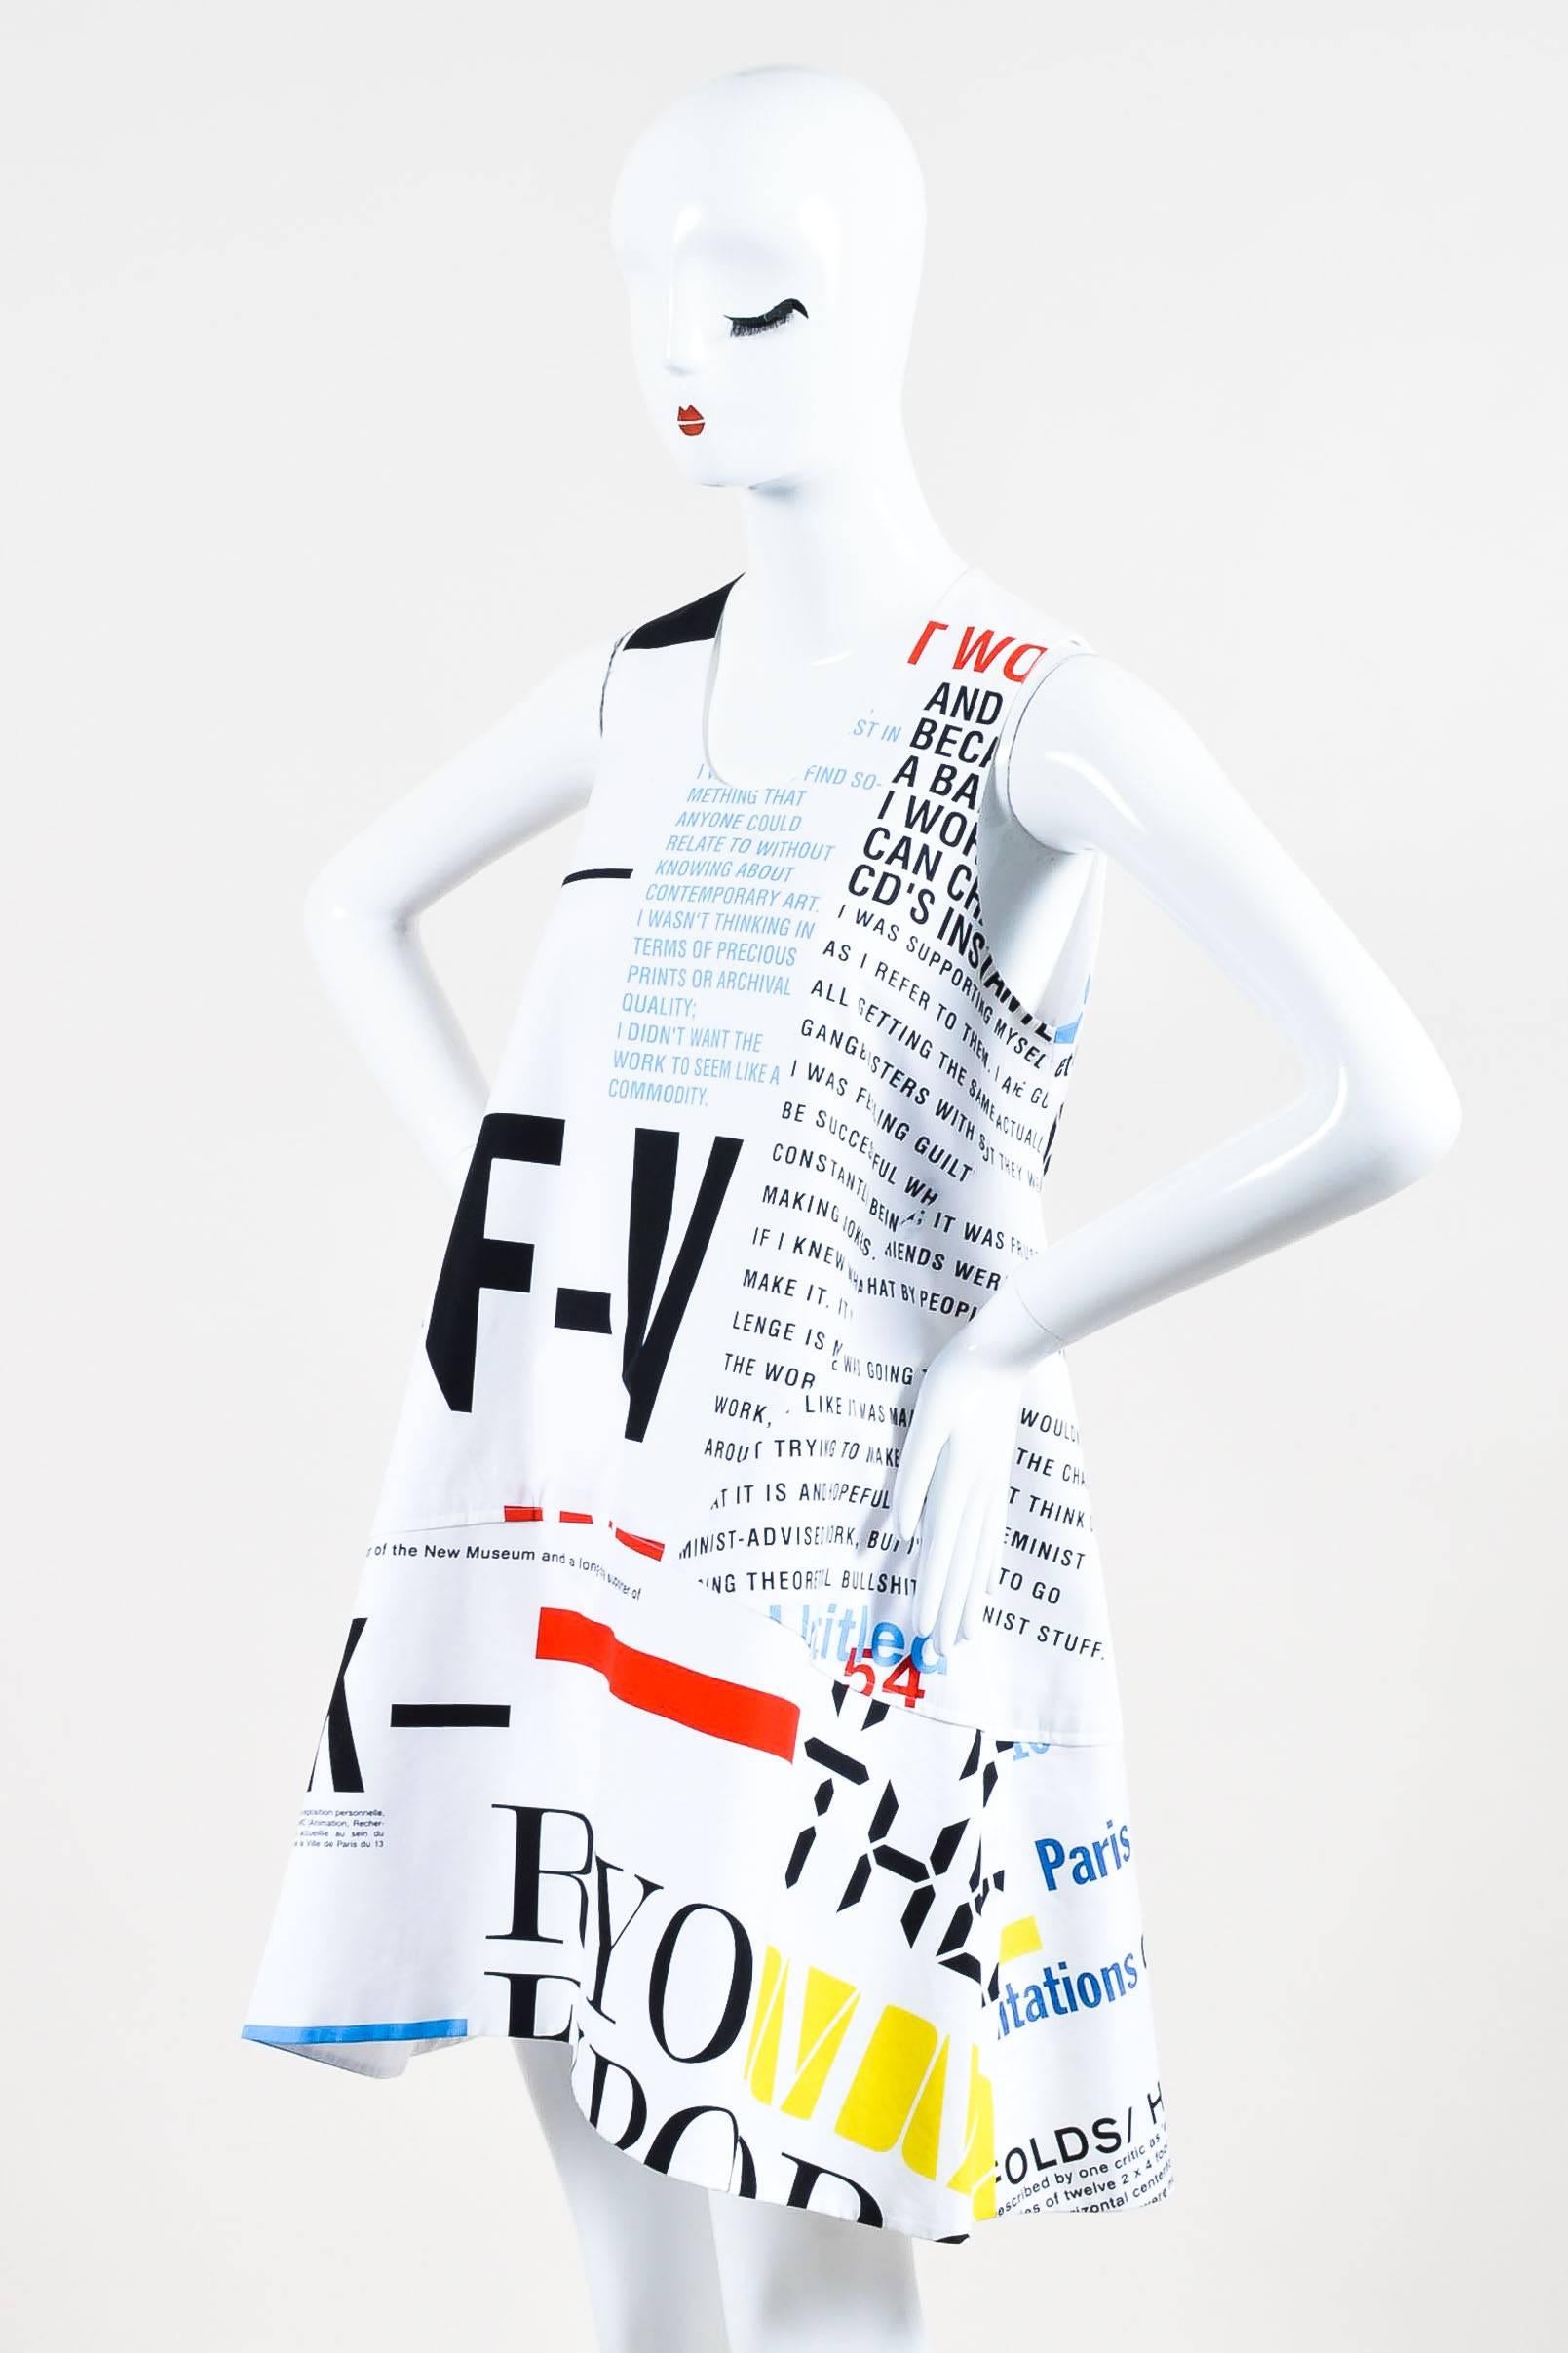 Rare special edition A-line dress. Cindy Sherman for Balenciaga circa 2010. White cotton with multicolor type print regarding art/museums. Sleeveless. Scoop U-neckline. Concealed back zip closure. Lined.

Size	
42 (IT)
10 (US) 	 

Additional